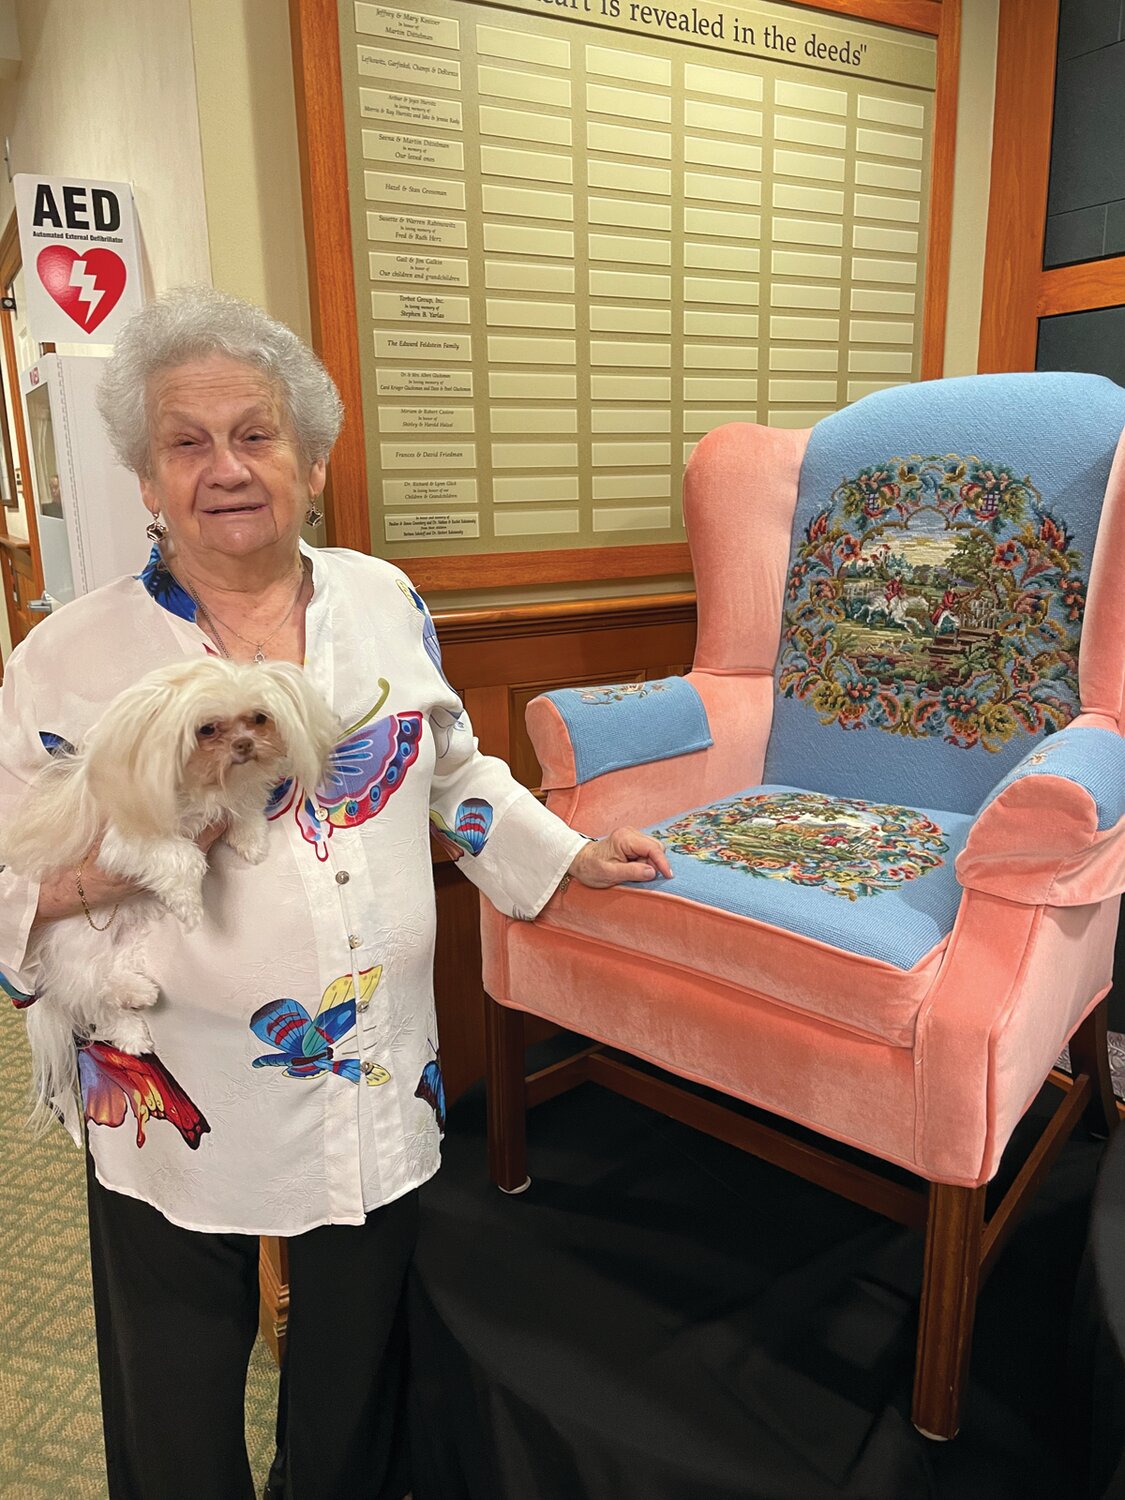 AMAZING HANDIWORK: Bertha, along with her trusty companion Melita, shows off the armchair she needlepointed. When asked how long it took, she said as long as it took.